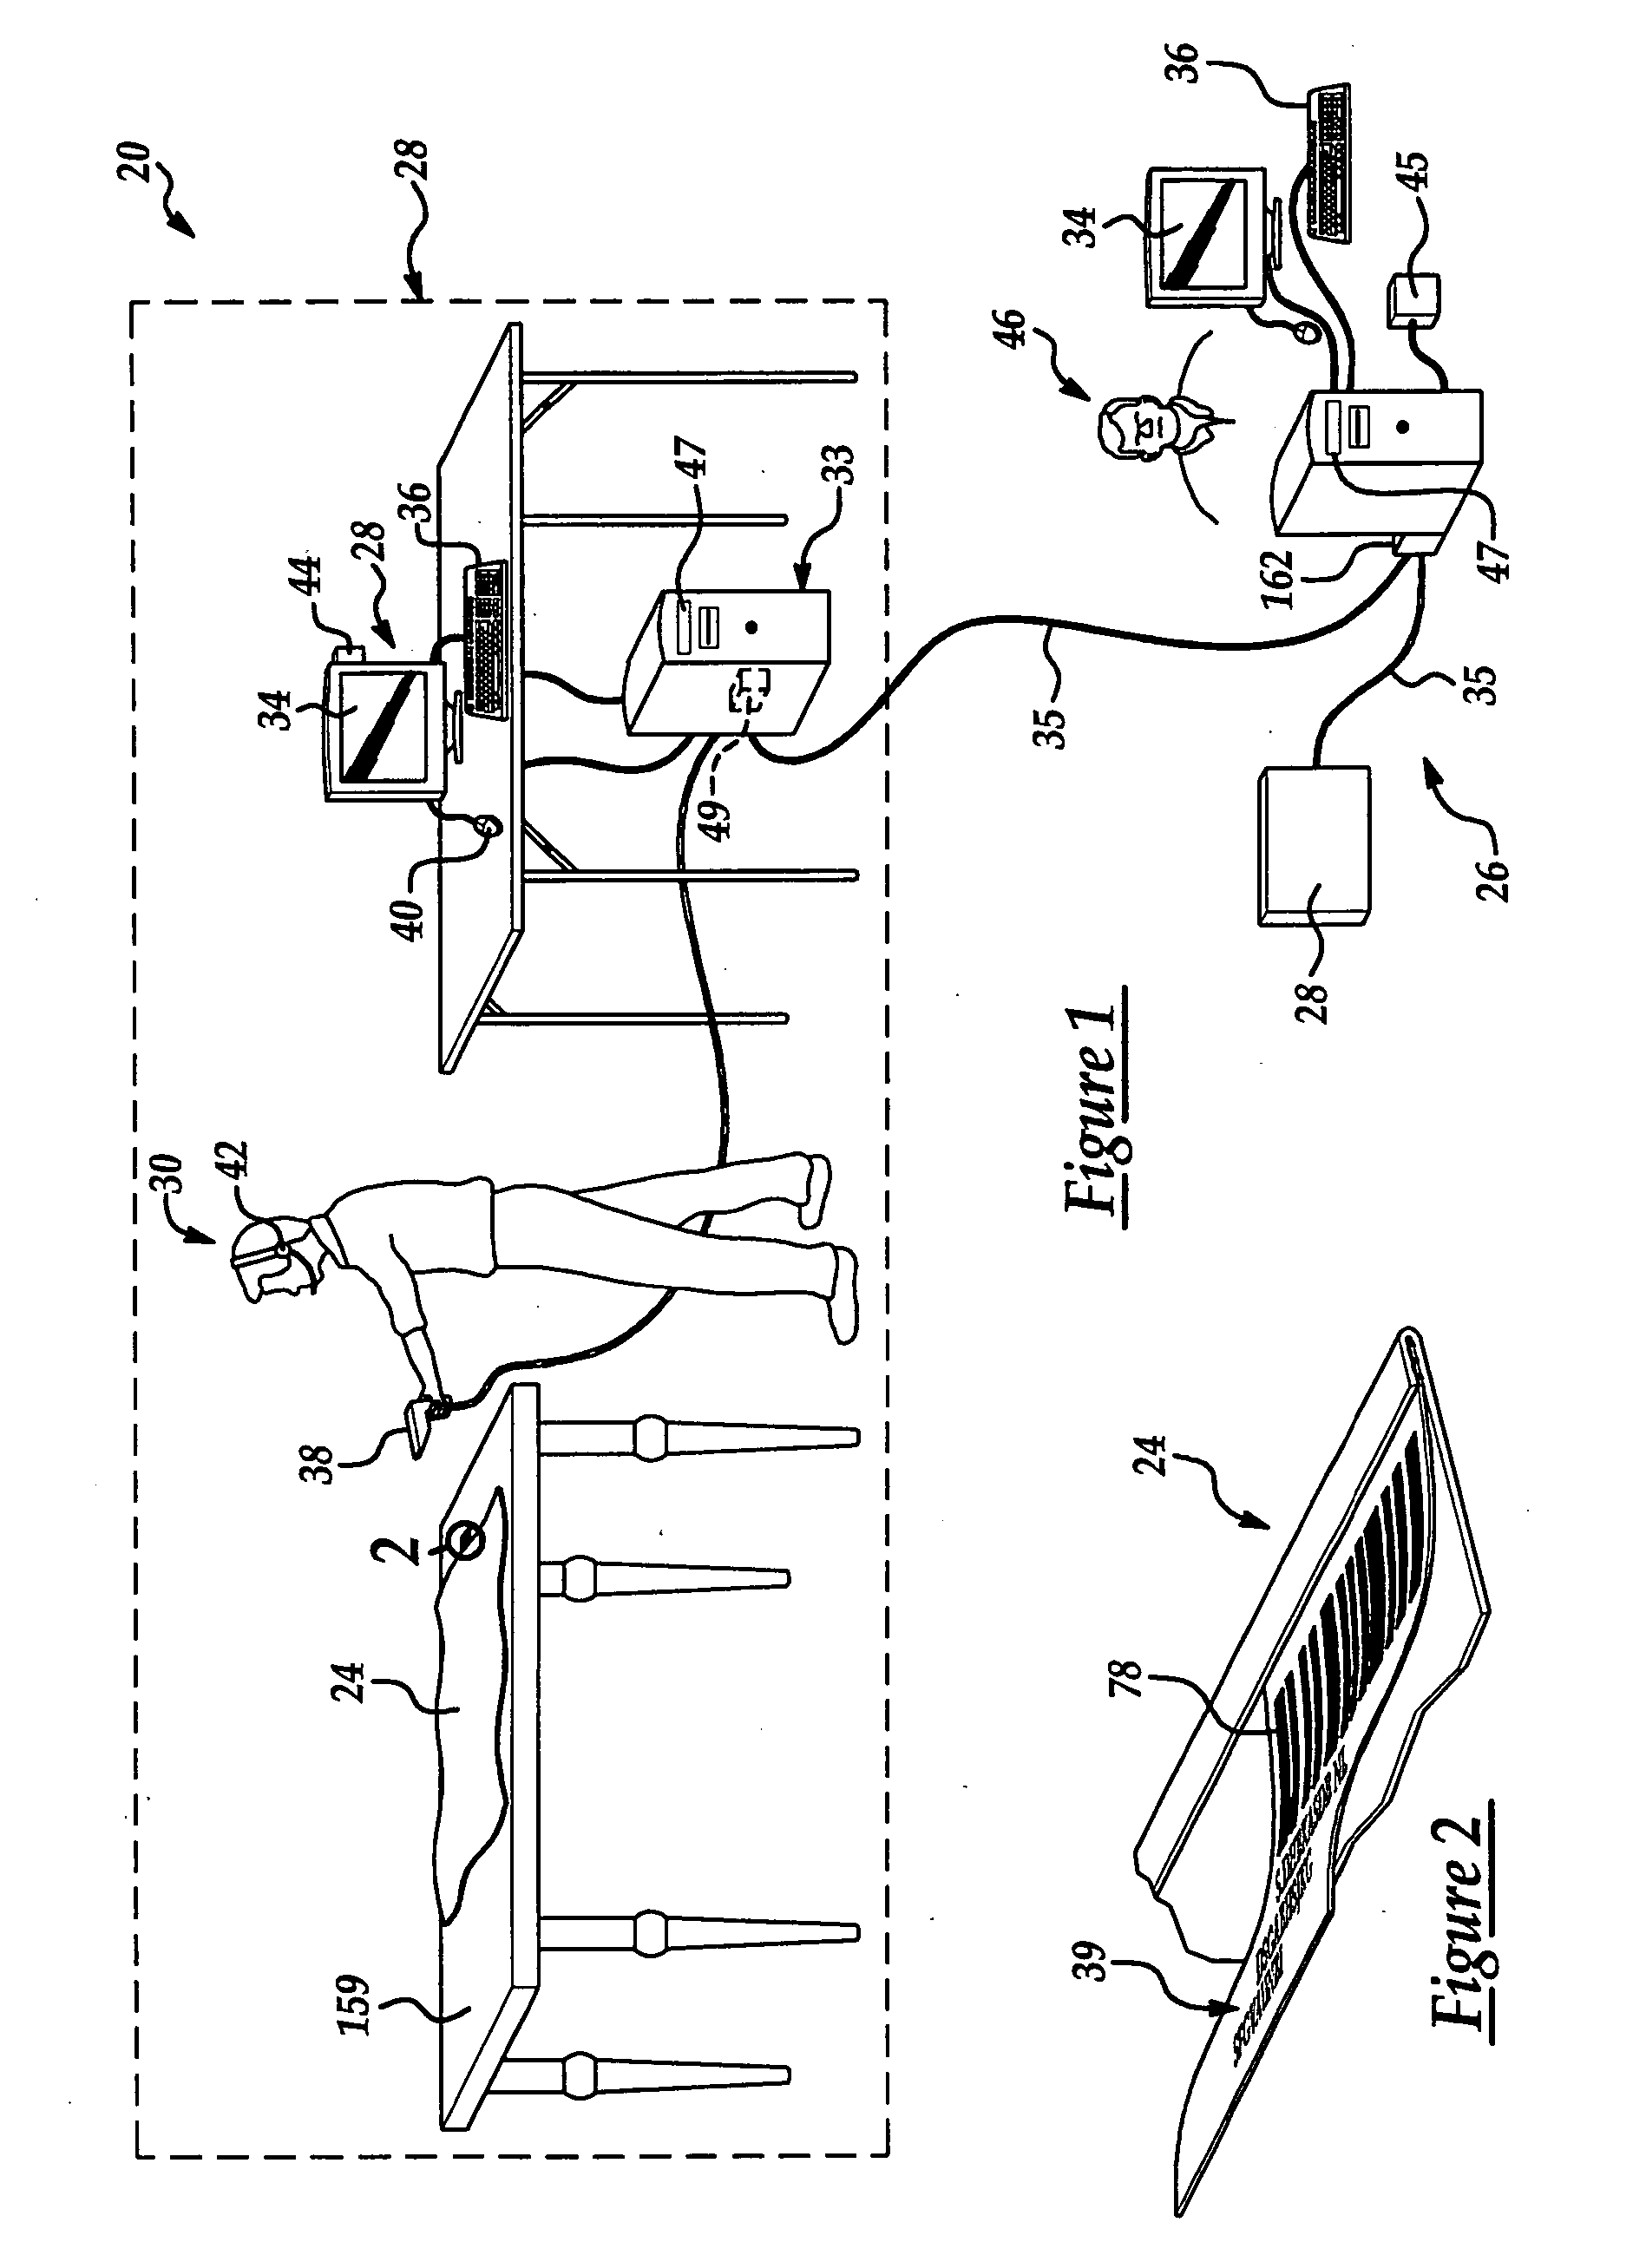 System and method for inspecting articles of manufacture